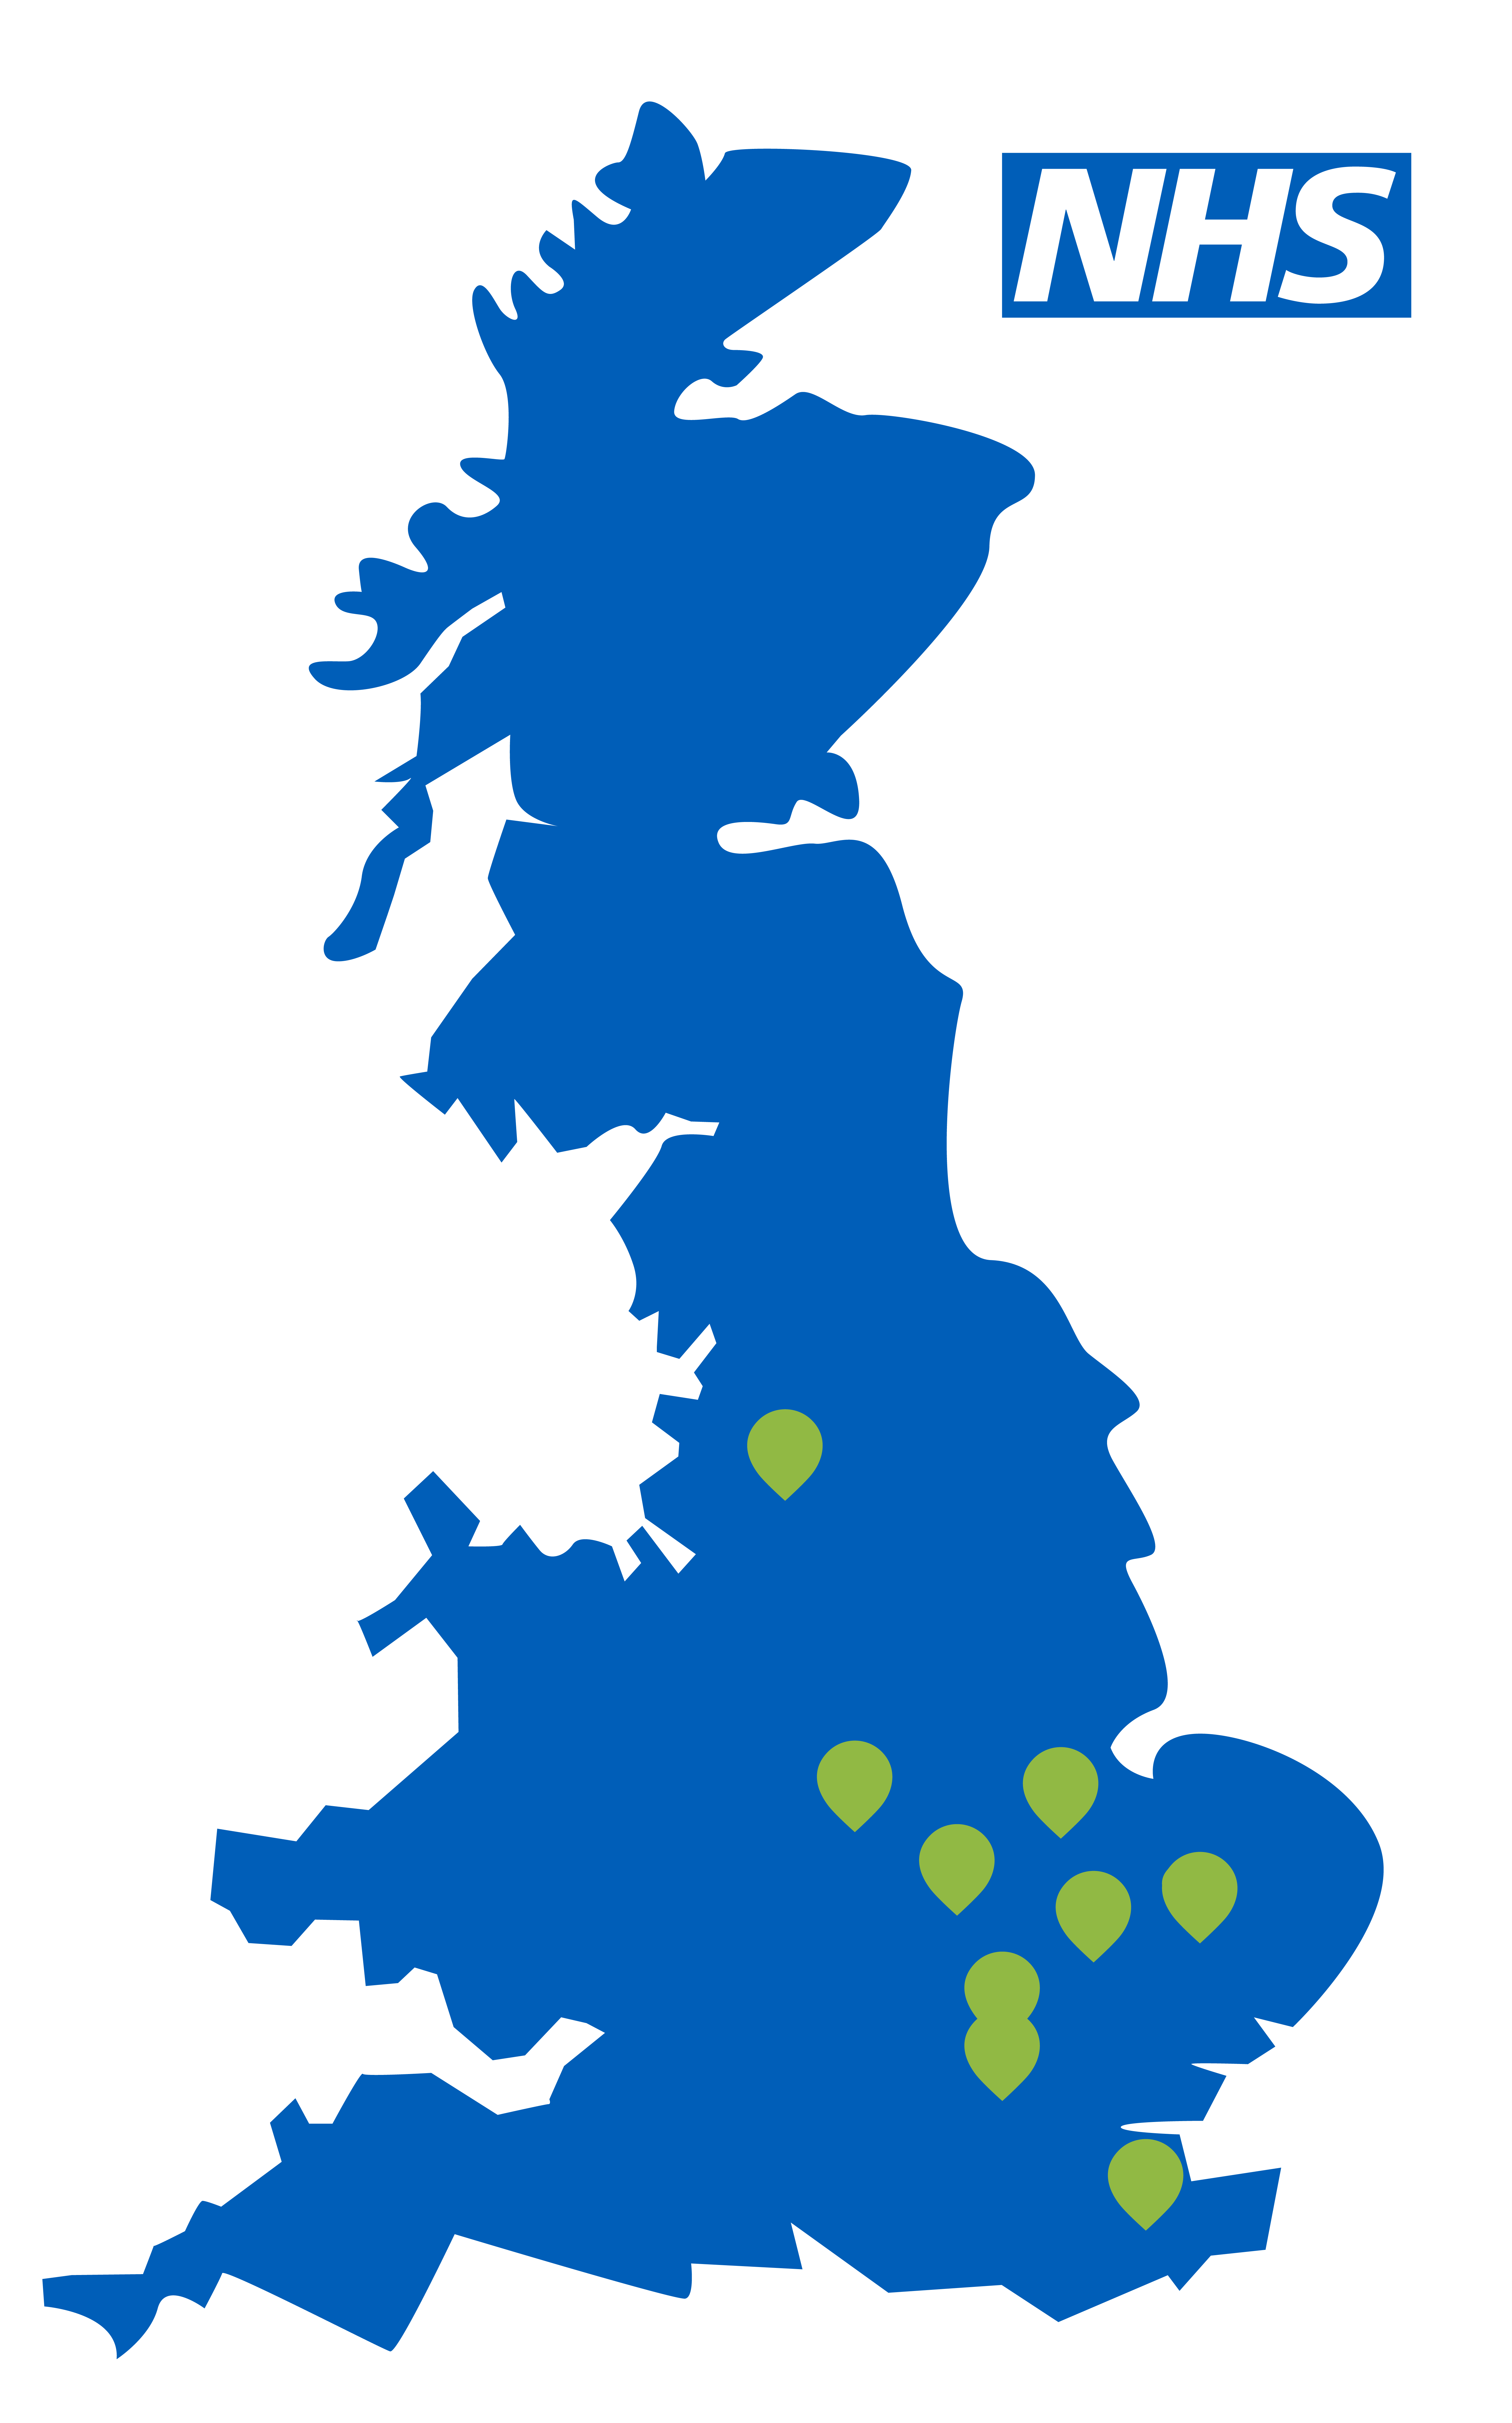 A UK map showing locations of NHS Trusts that use our HMBT services